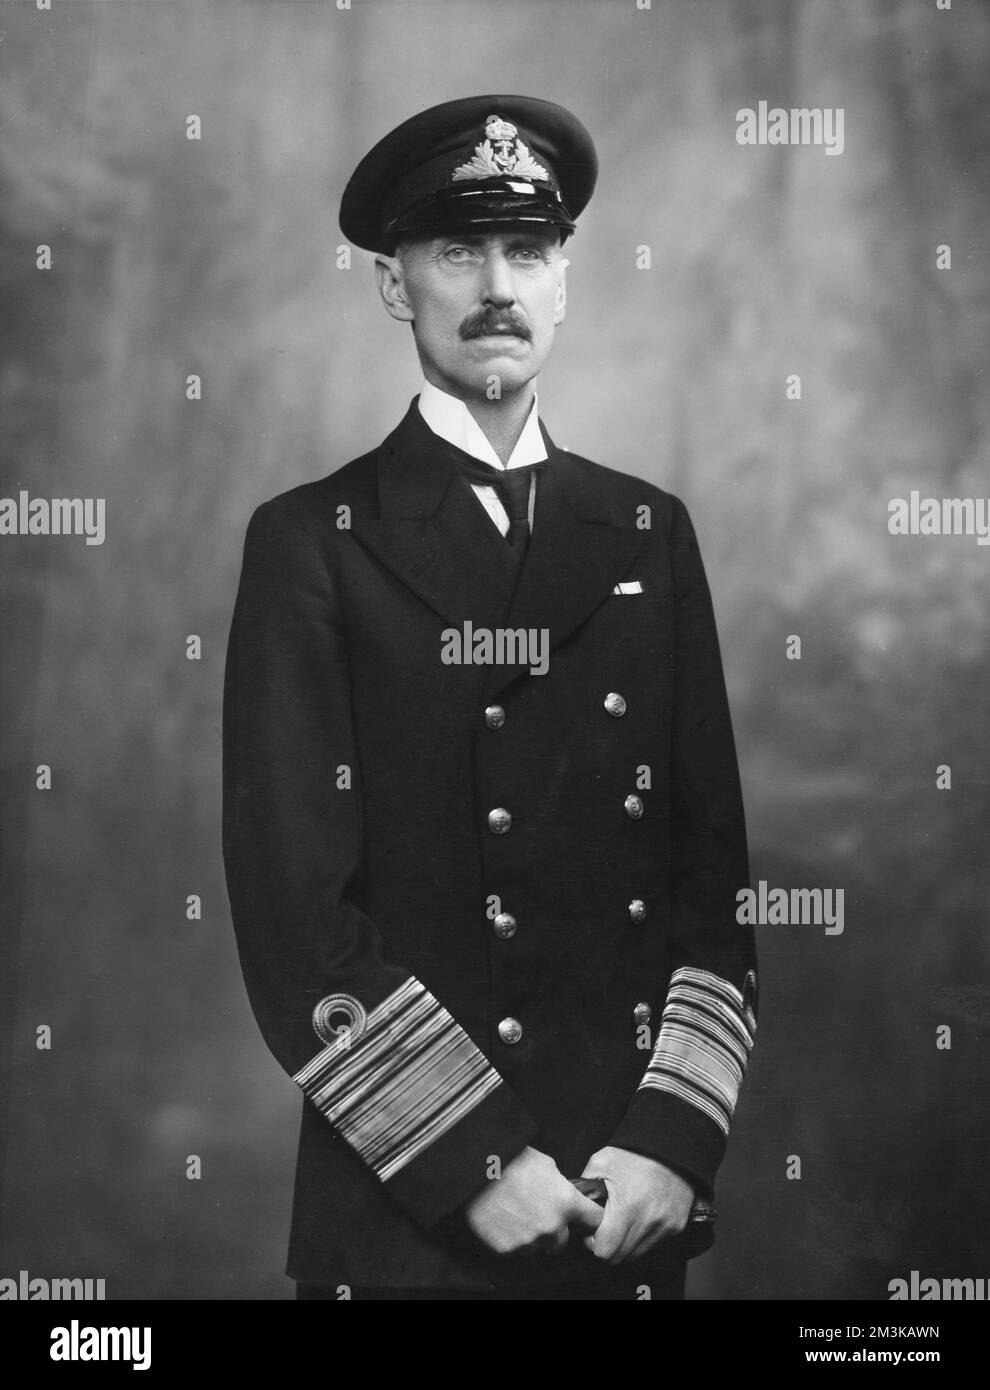 Portrait of King Haakon VII of Norway (1872 - 1957), born Prince Christian Frederik CARL Georg Valdemar Axel of Denmark.  Married Princess Maud of Wales and Great Britain in 1896.  After the dissolution of the Union of Sweden and Norway, he became the leading European Royal candidate to become monarch of the newly independent Norway.  Before accepting the crown, Prince Carl insisted on a referendum.  The Norwegian people voted overwhelmingly for a monarchy and Carl was crowned King Haakon VII in 1906.     Date: c.1940 Stock Photo